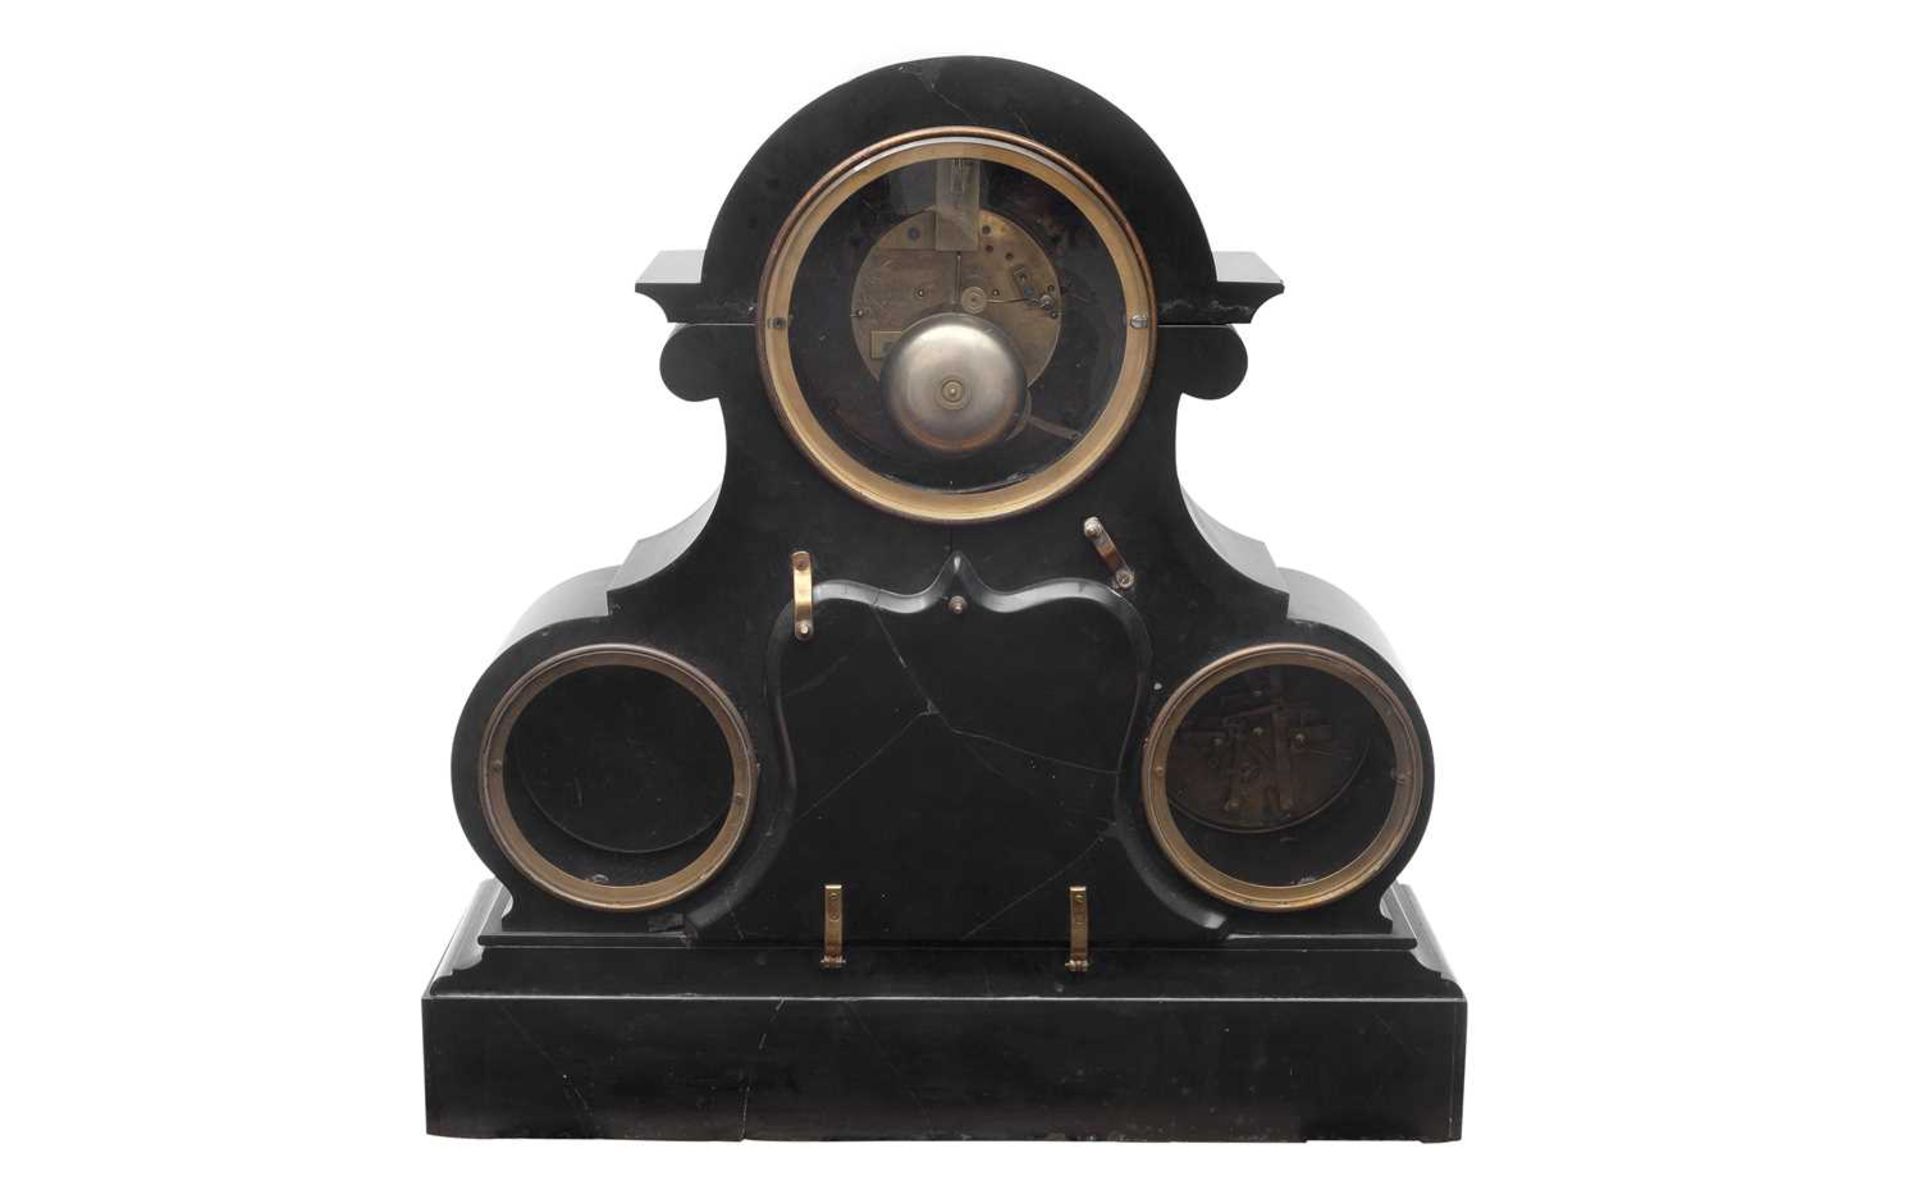 AN IMPRESSIVE 19TH CENTURY FRENCH PERPETUAL CALENDAR CLOCK WITH MOONPHASE AND BAROMETER - Image 2 of 6